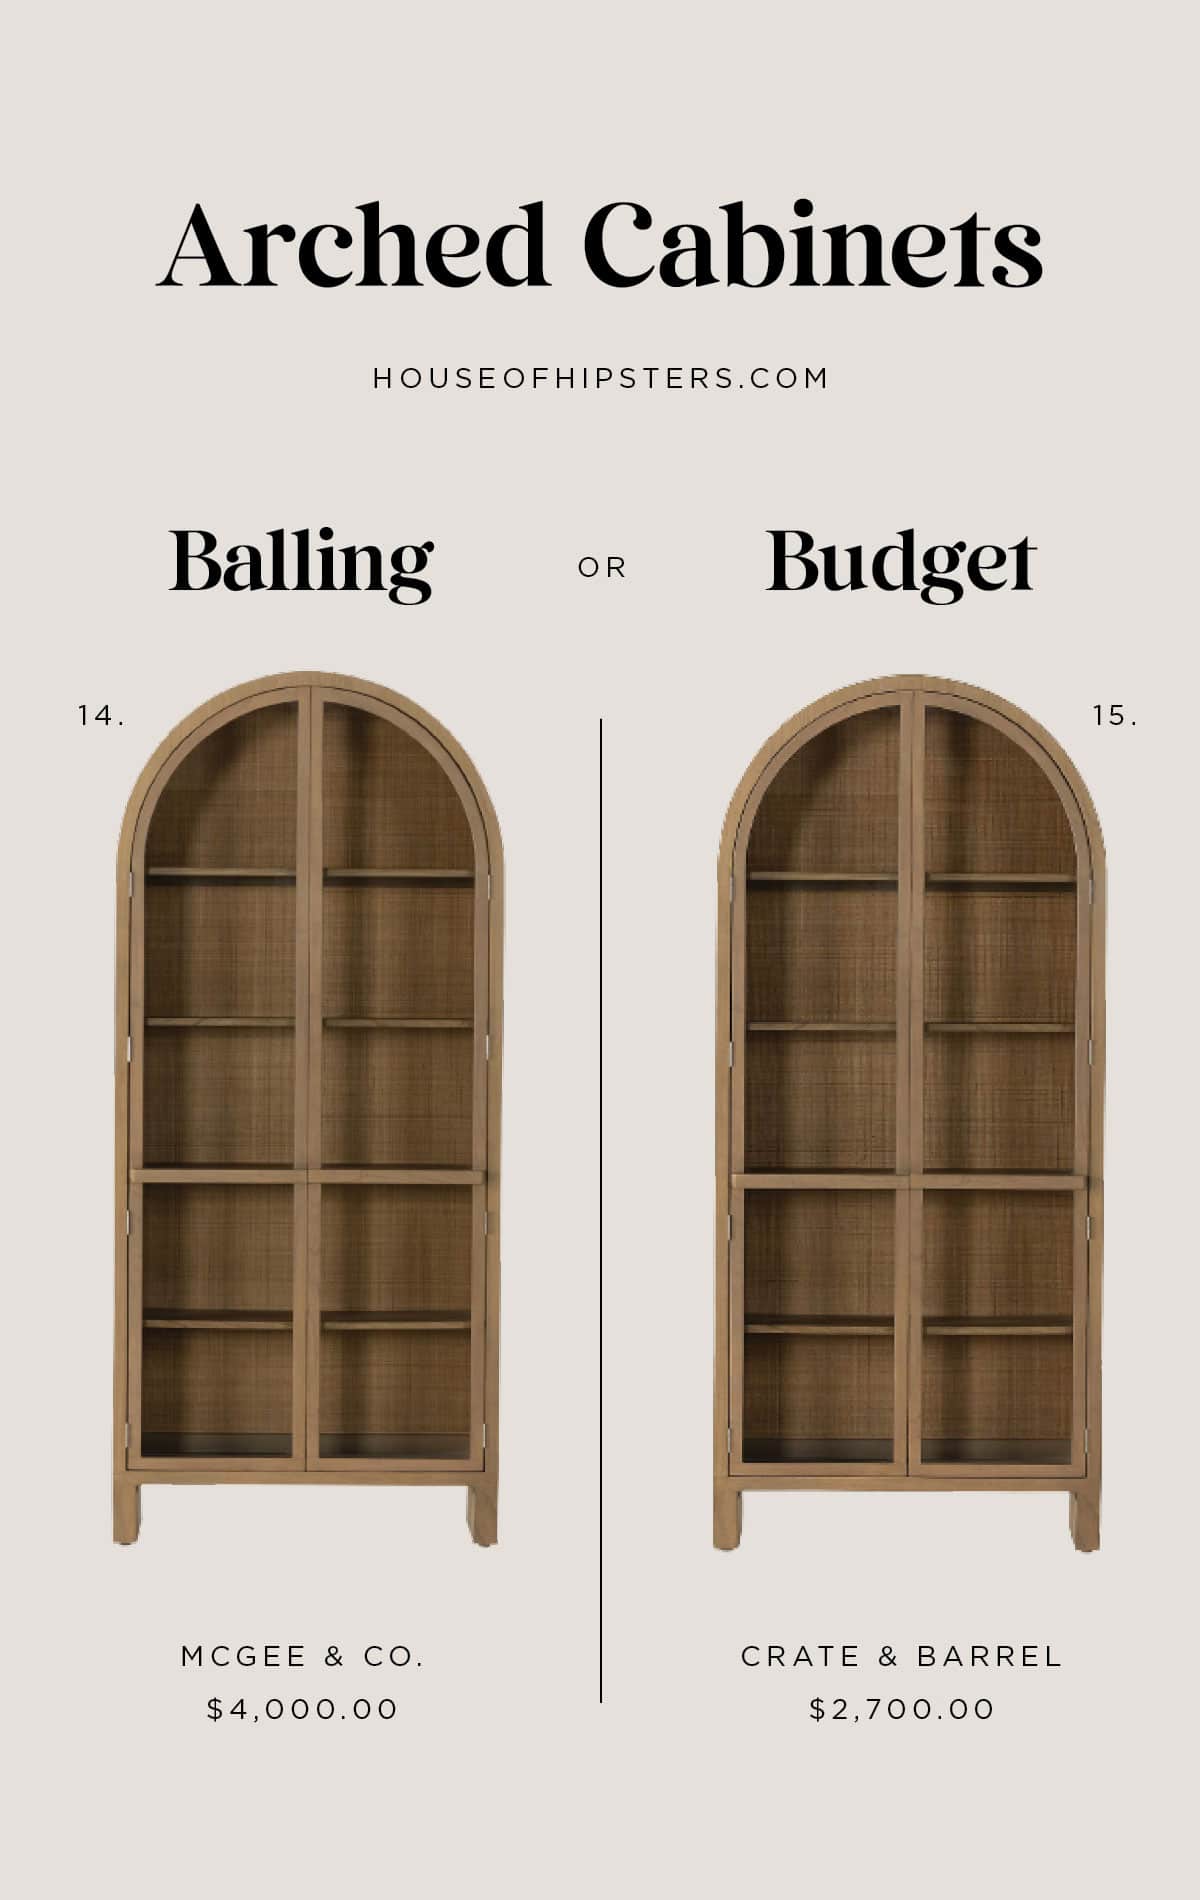 22 Stunning Arched Cabinets 2023 - Splurge or save, you decide!